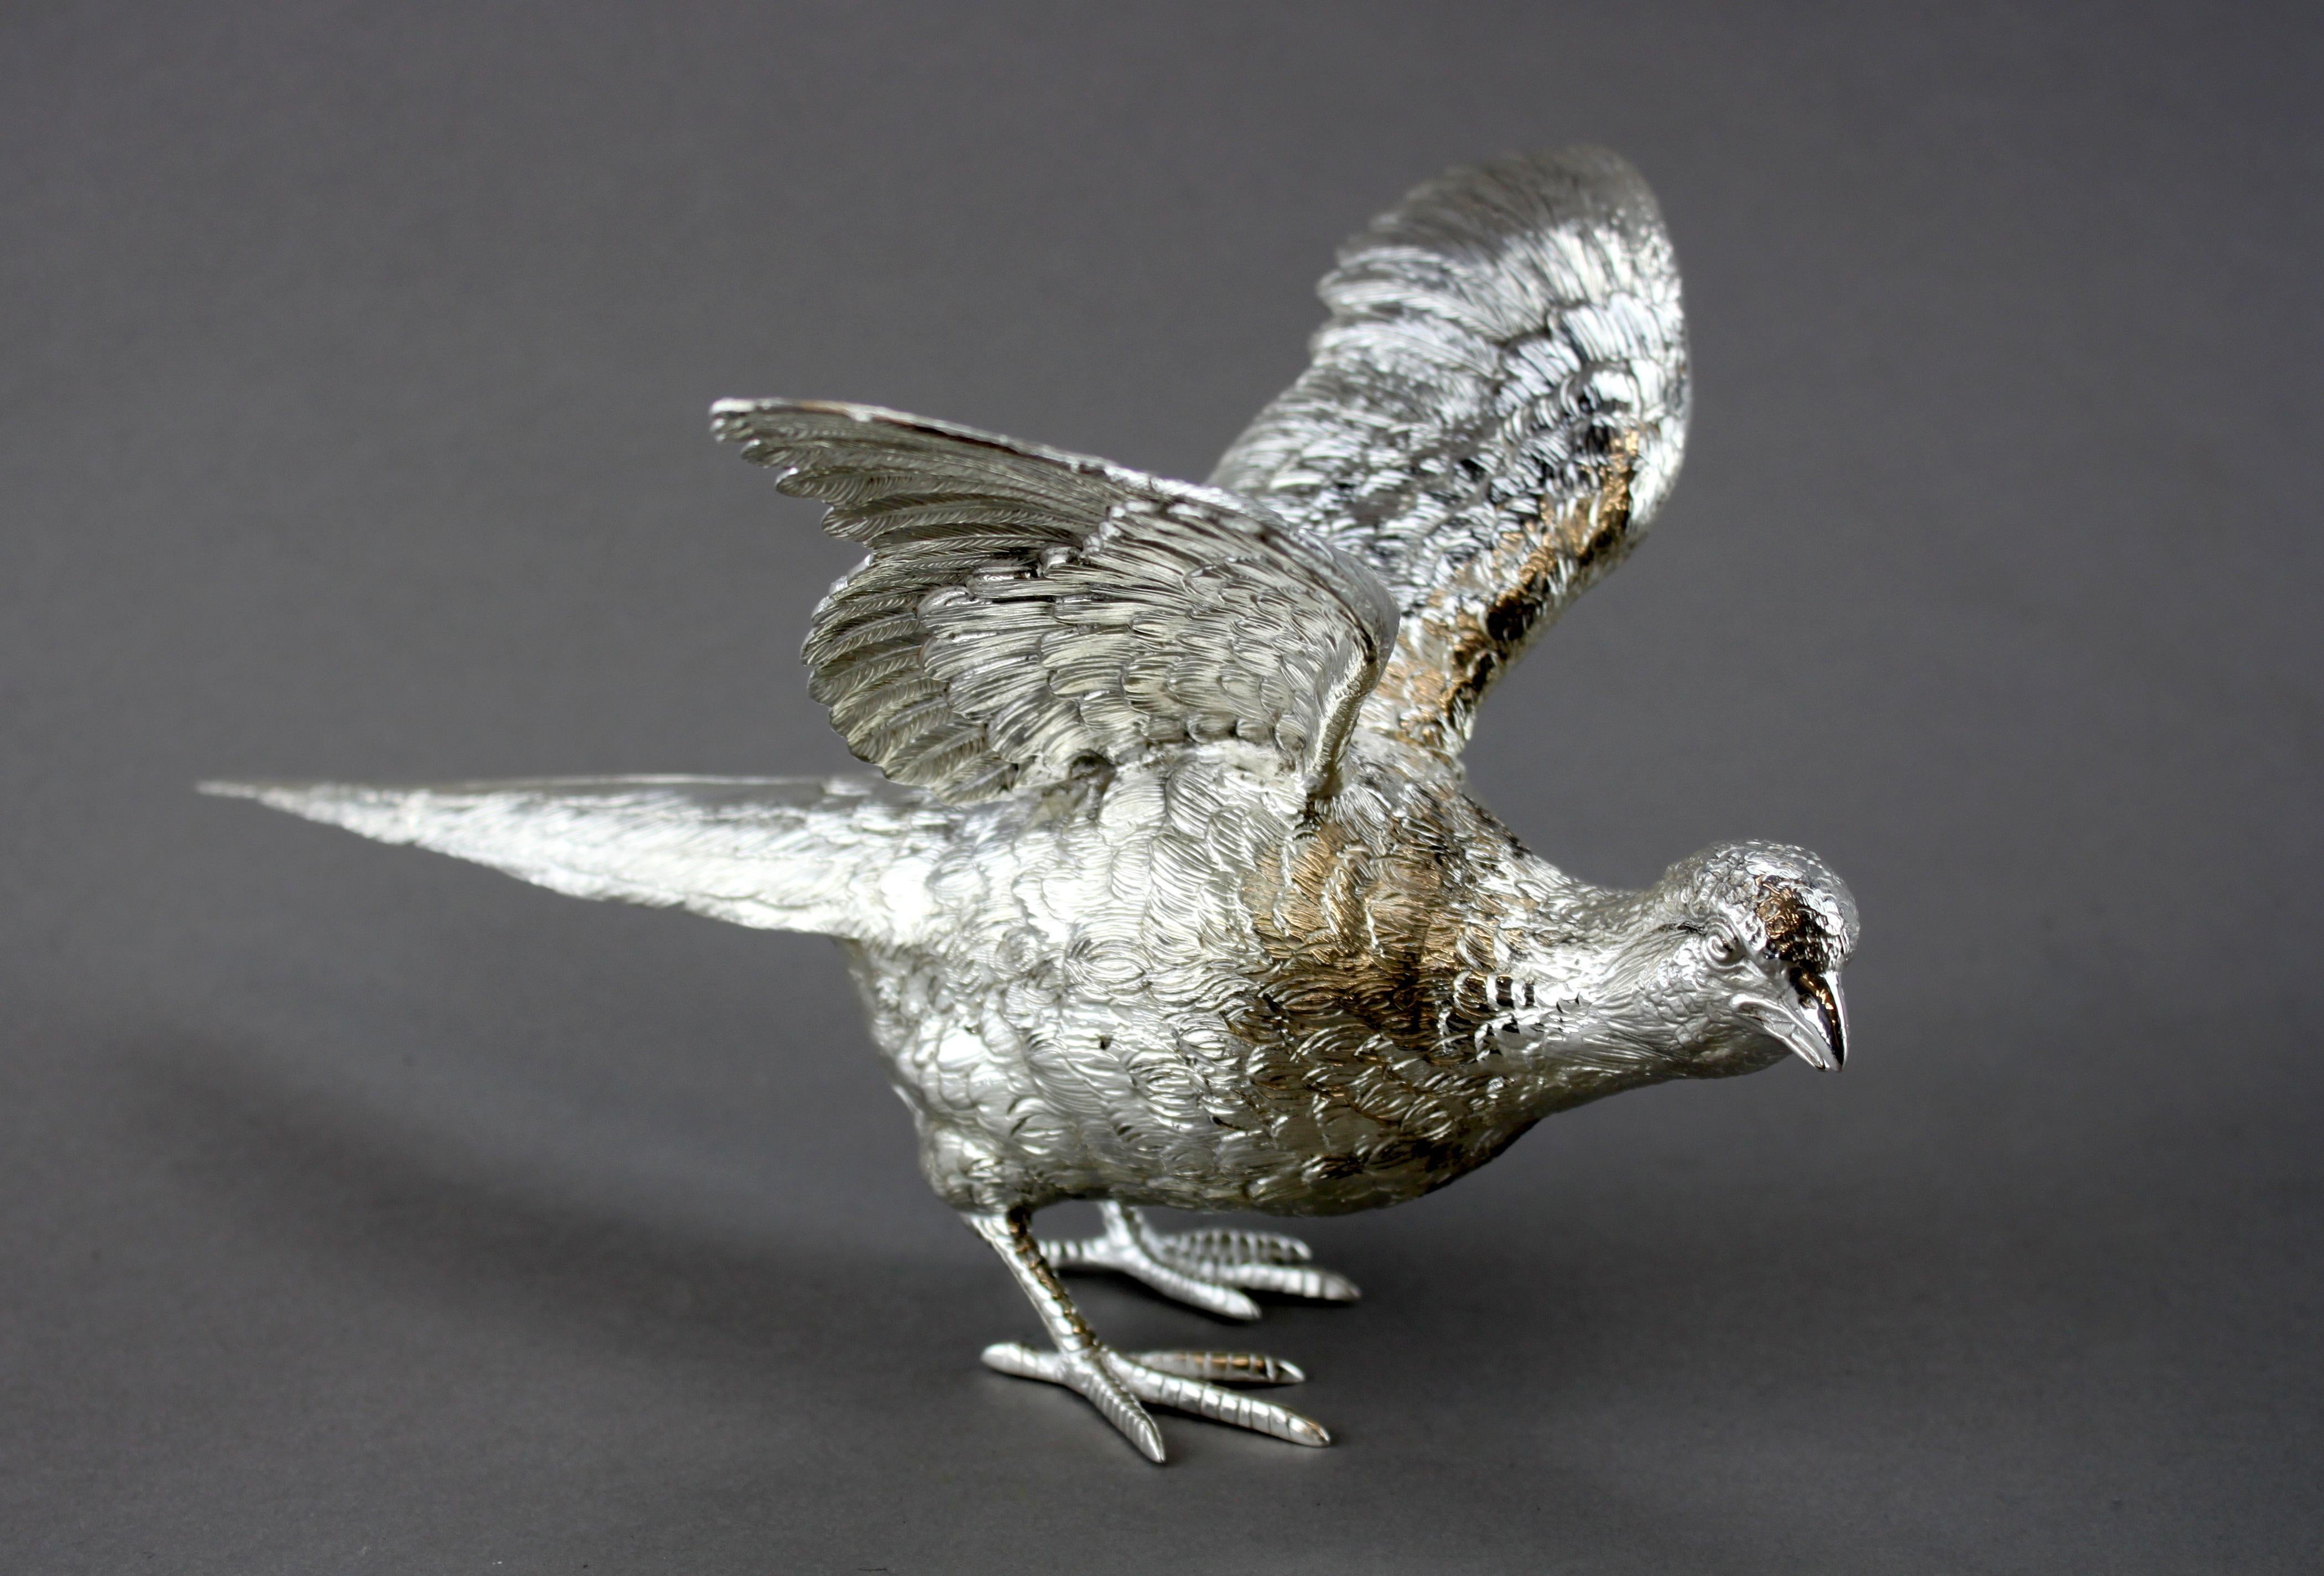 Sterling silver bird figurine
Maker: C J Vander LTD
Made in London 2018
Fully hallmarked.

Dimensions: 
Length 28.5 cm
Width 21 cm
Height 15 cm
Weight 1056 grams

Condition: Bird figurine is pre-owned, general used, no damage, excellent